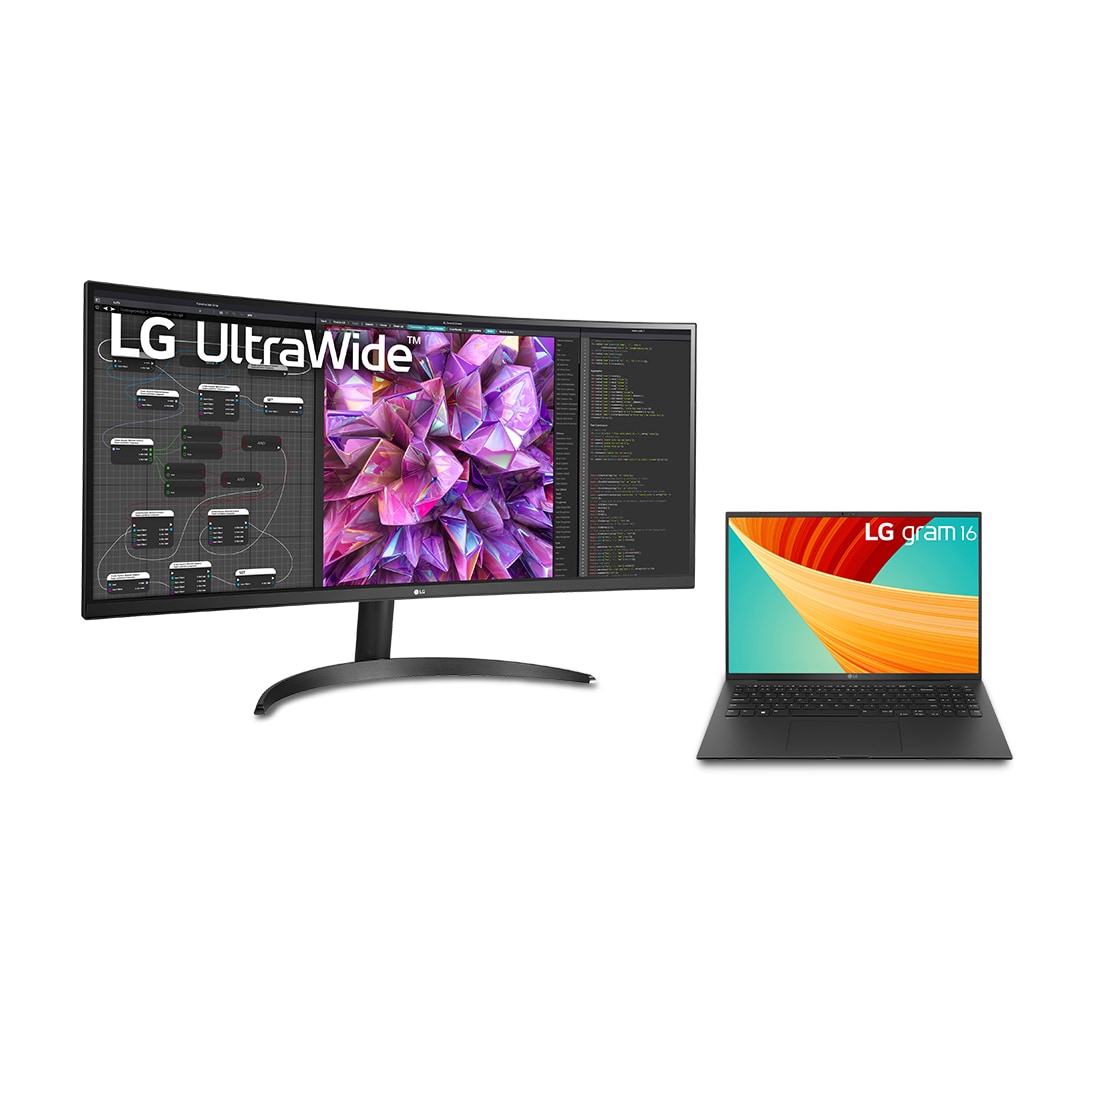 Home Office Upgrade Bundle: 16'' LG gram Laptop with 34'' UltraWide Monitor